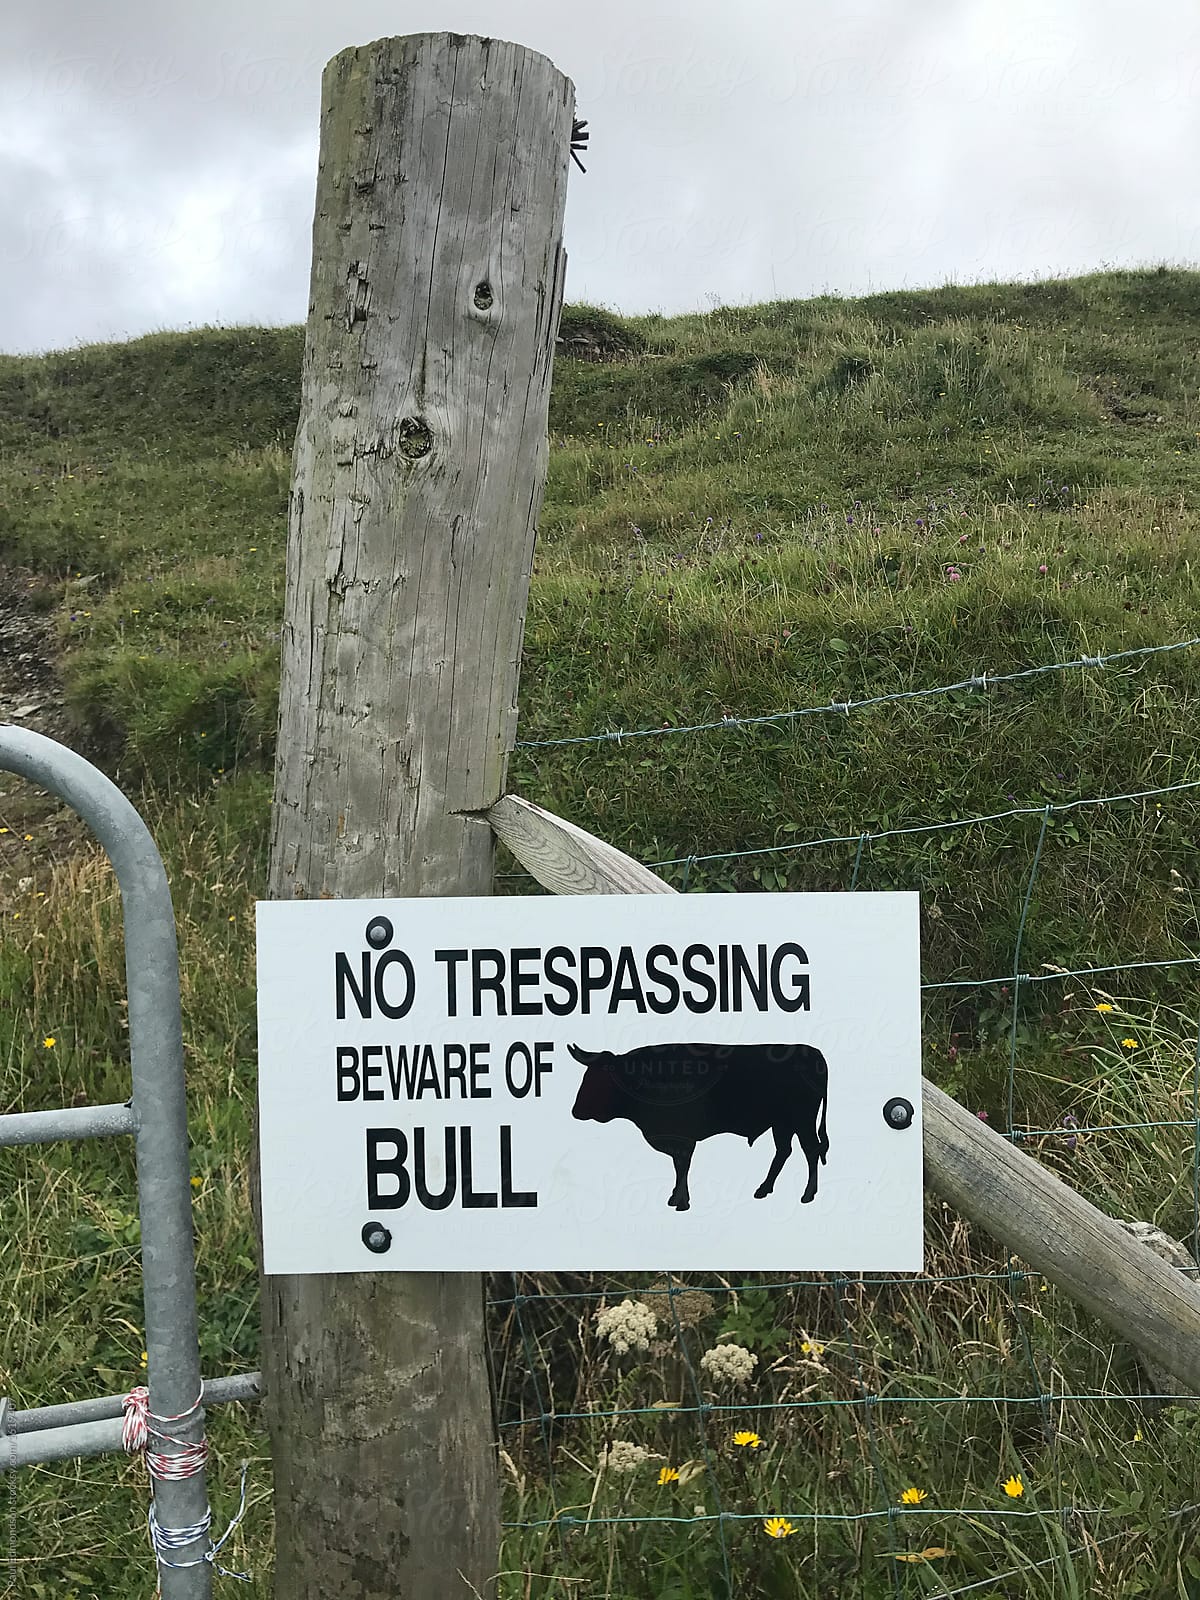 No trespassing sign, Beware of BULL in front of gate to rural farm, Cliffs of Moher, Ireland